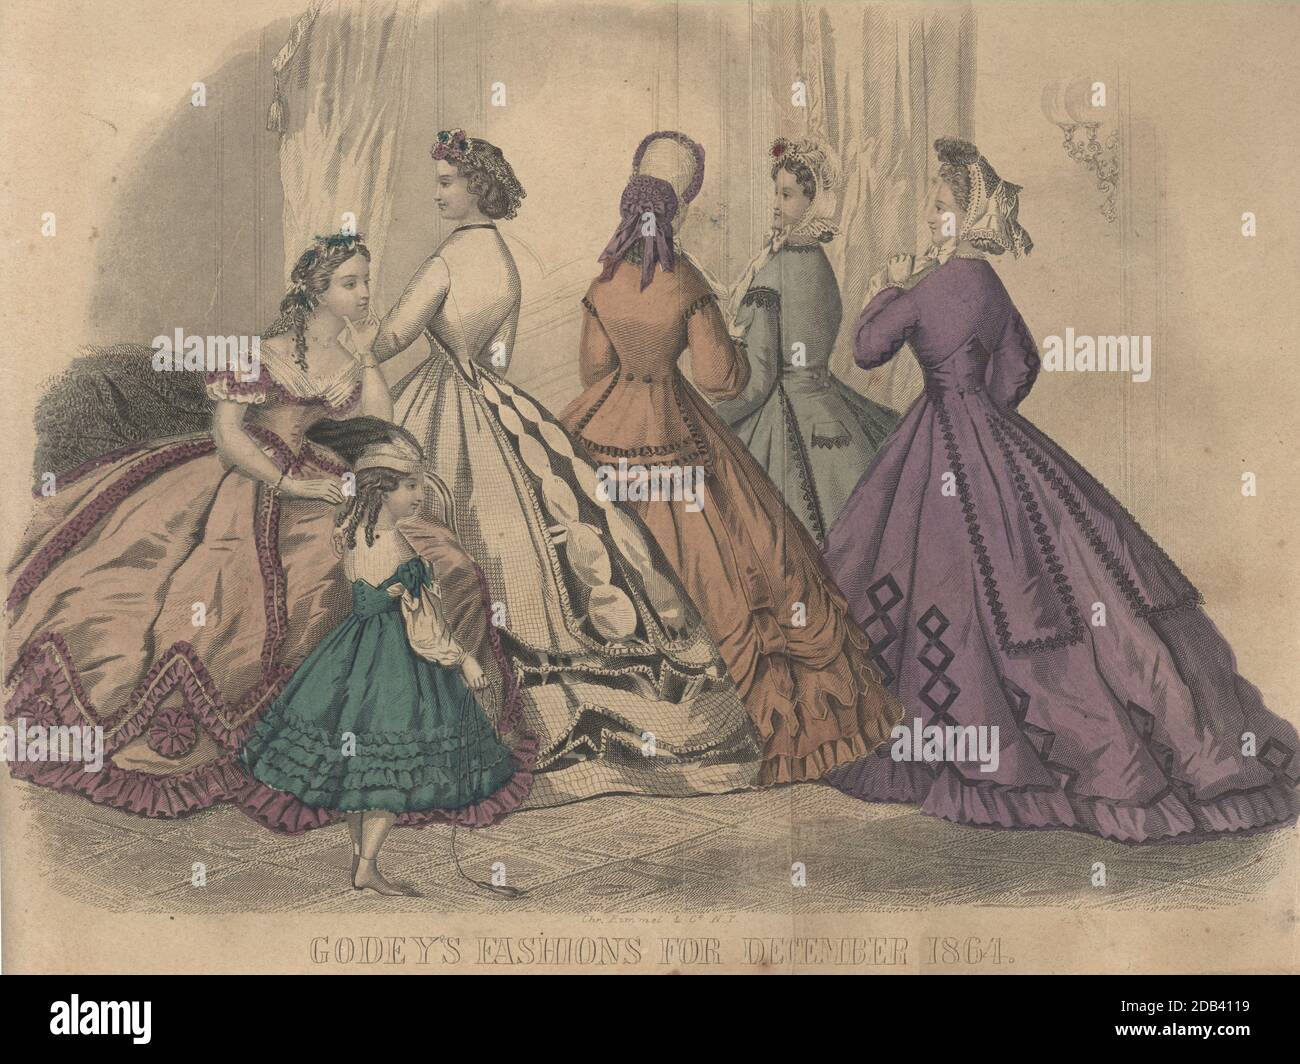 Godey's Fashion for December 1864 from Godey's Lady's Book and Magazine, December, 1864, Volume LXIX, (Volume 69), Philadelphia, Louis A. Godey, Sarah Josepha Hale, Stock Photo